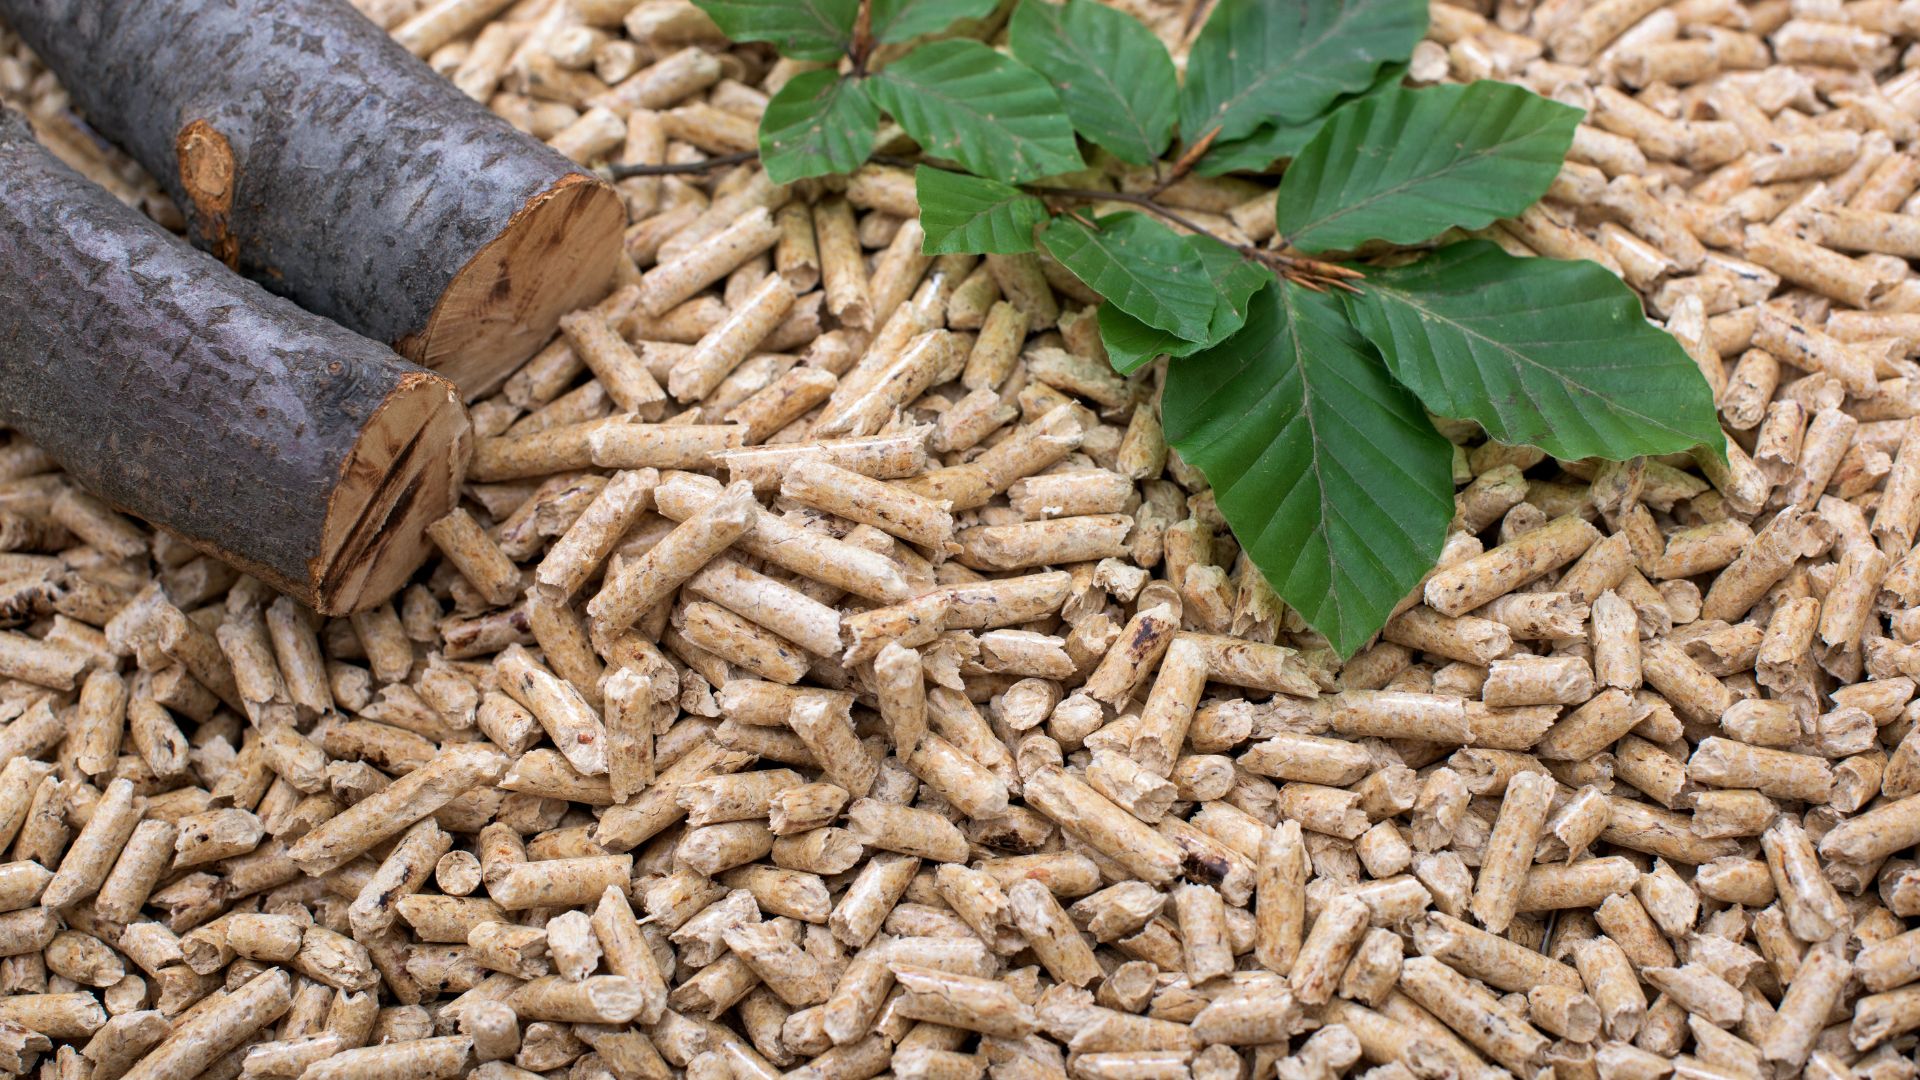 Creating a market for biomass products